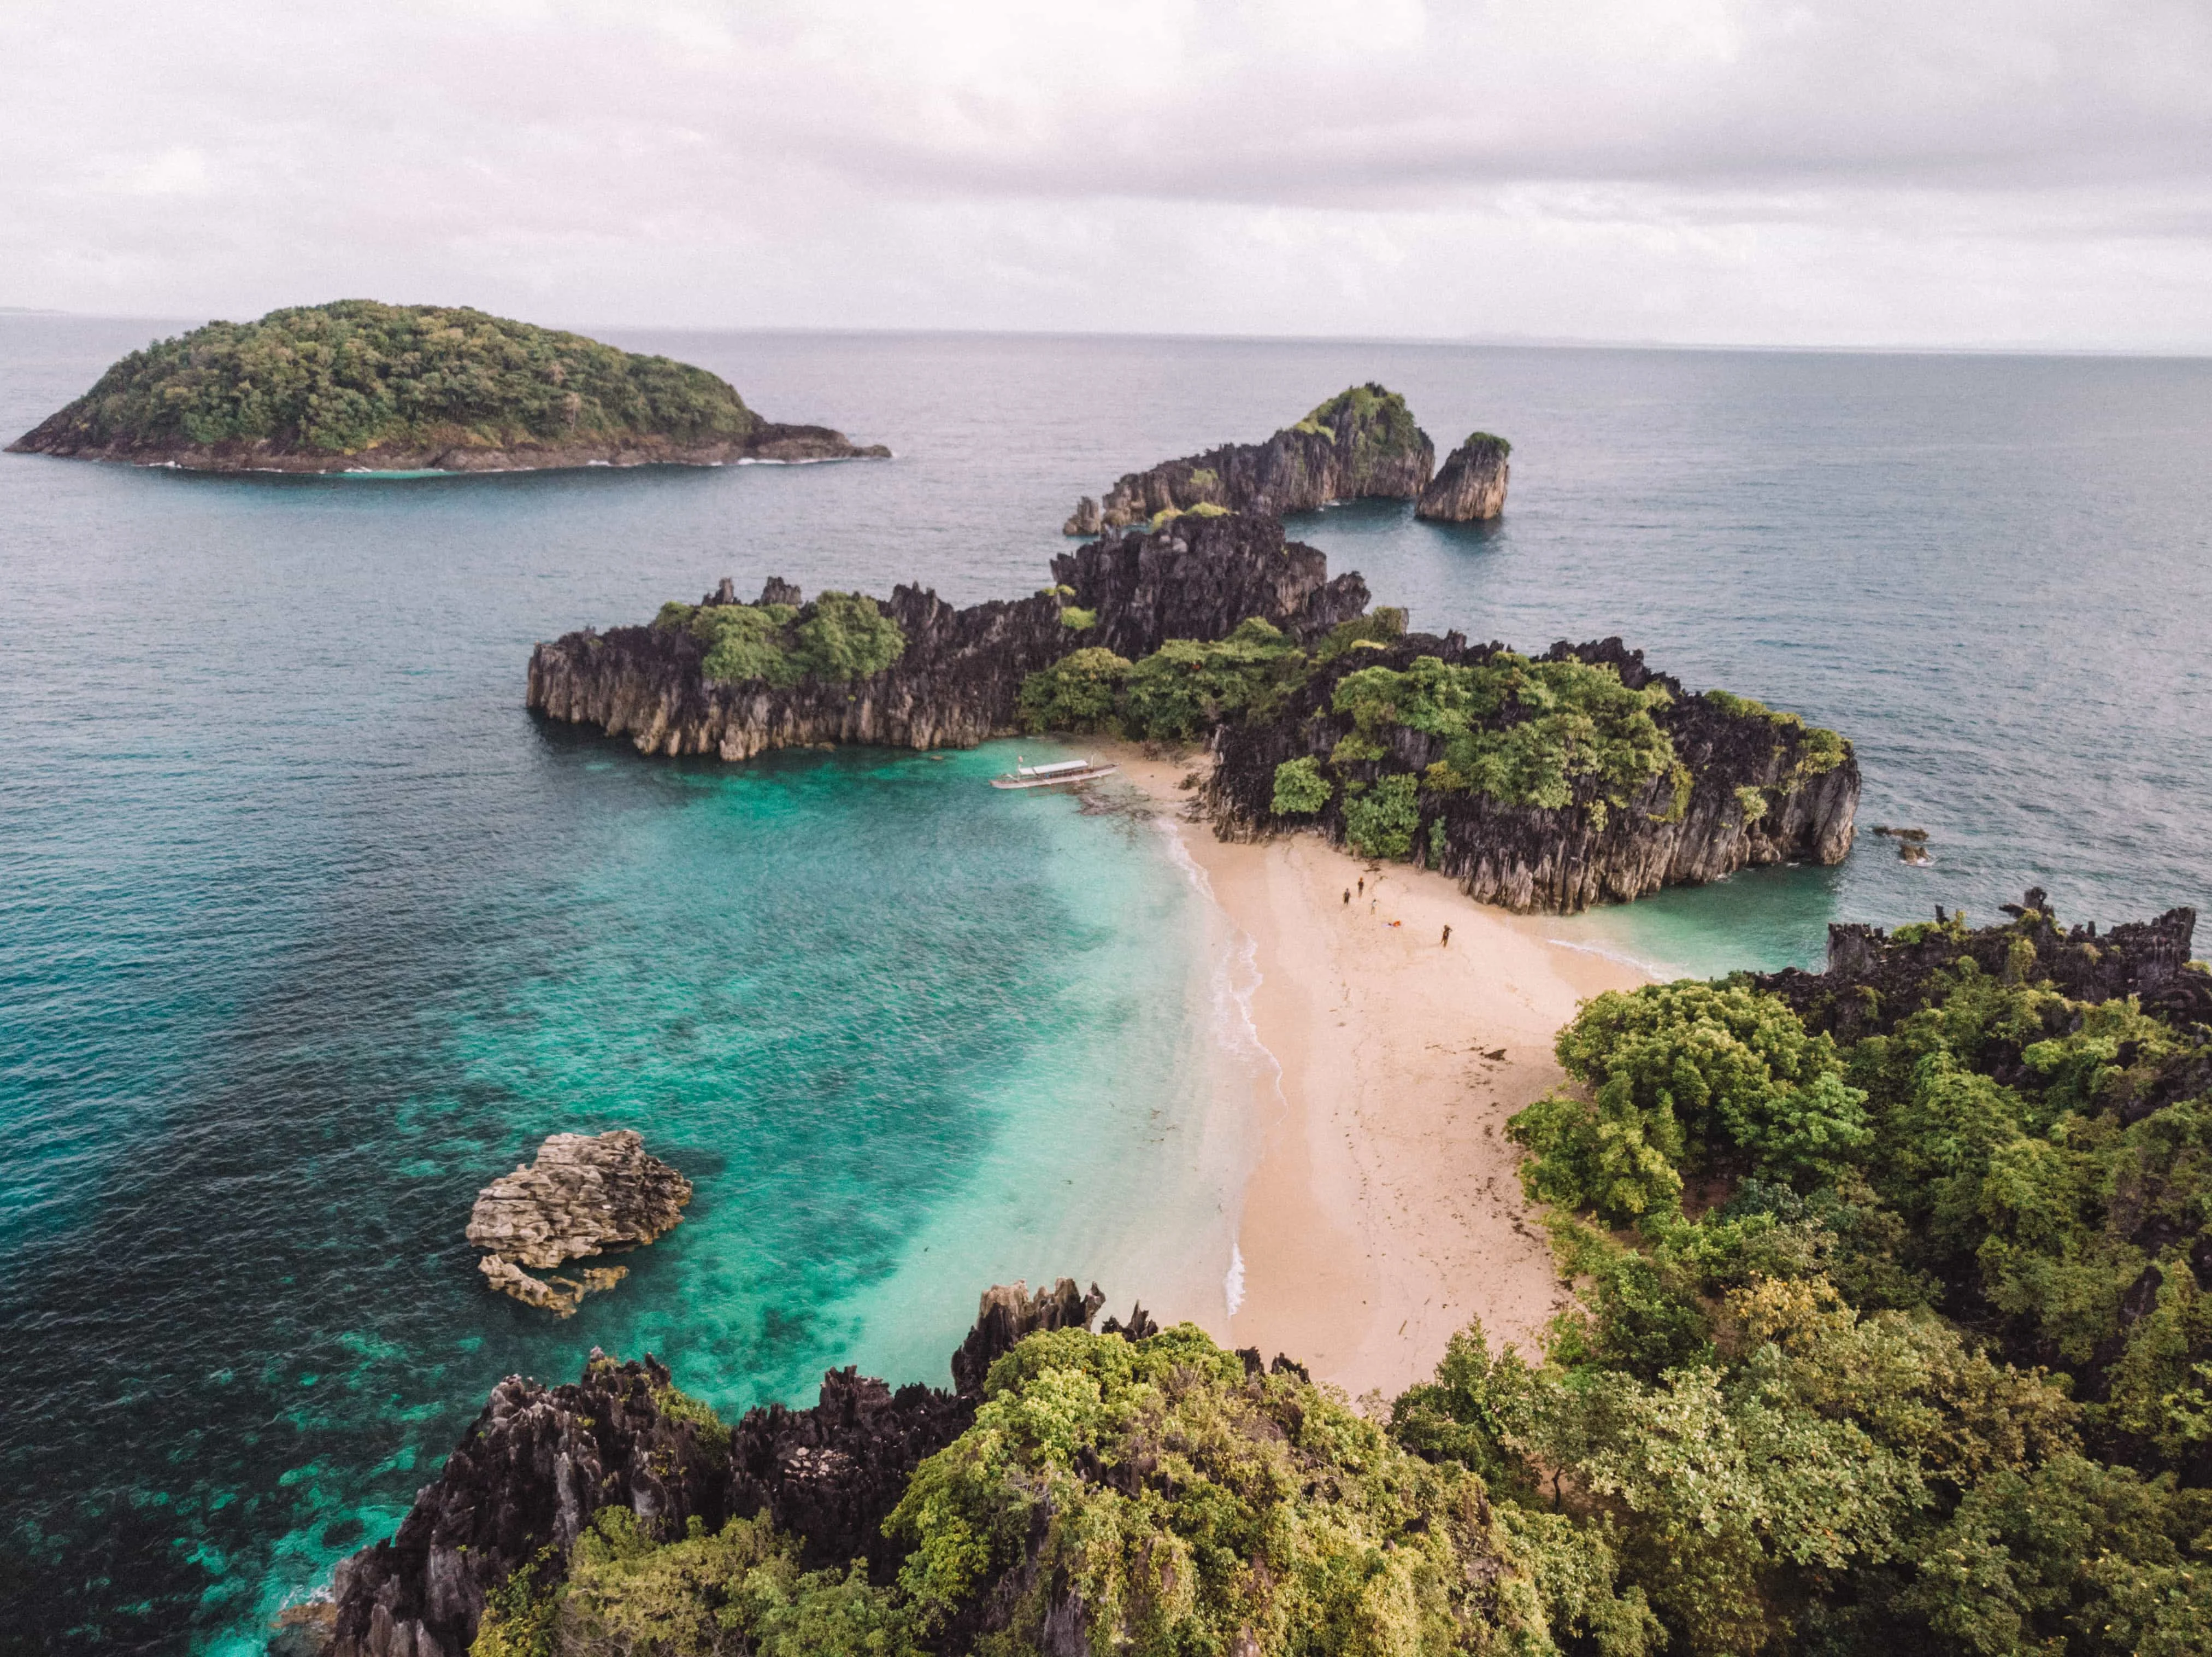 How to get from Manila to Caramoan, Caramoan itinerary, How to get to Caramoan